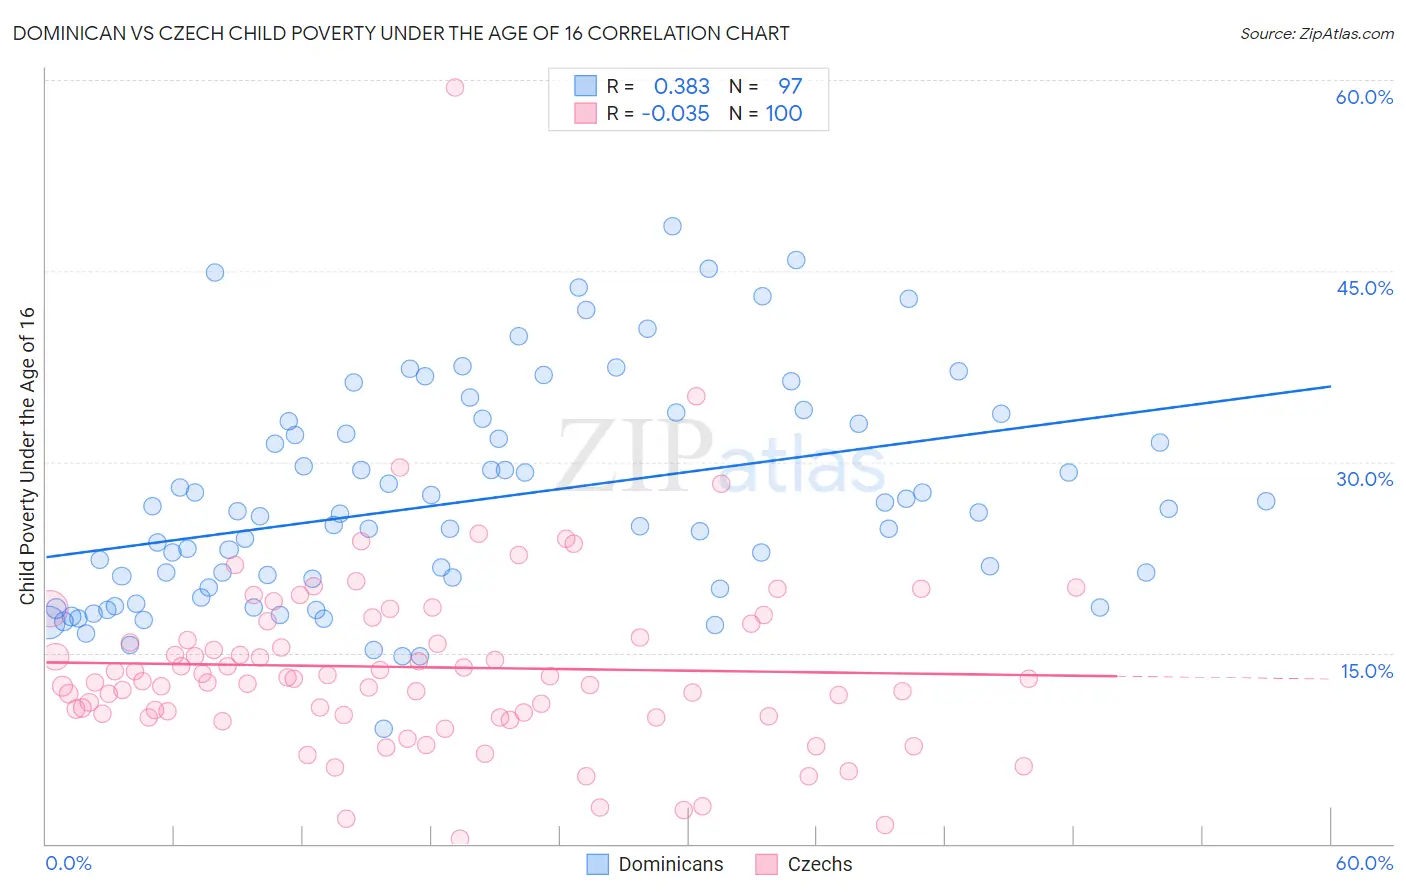 Dominican vs Czech Child Poverty Under the Age of 16